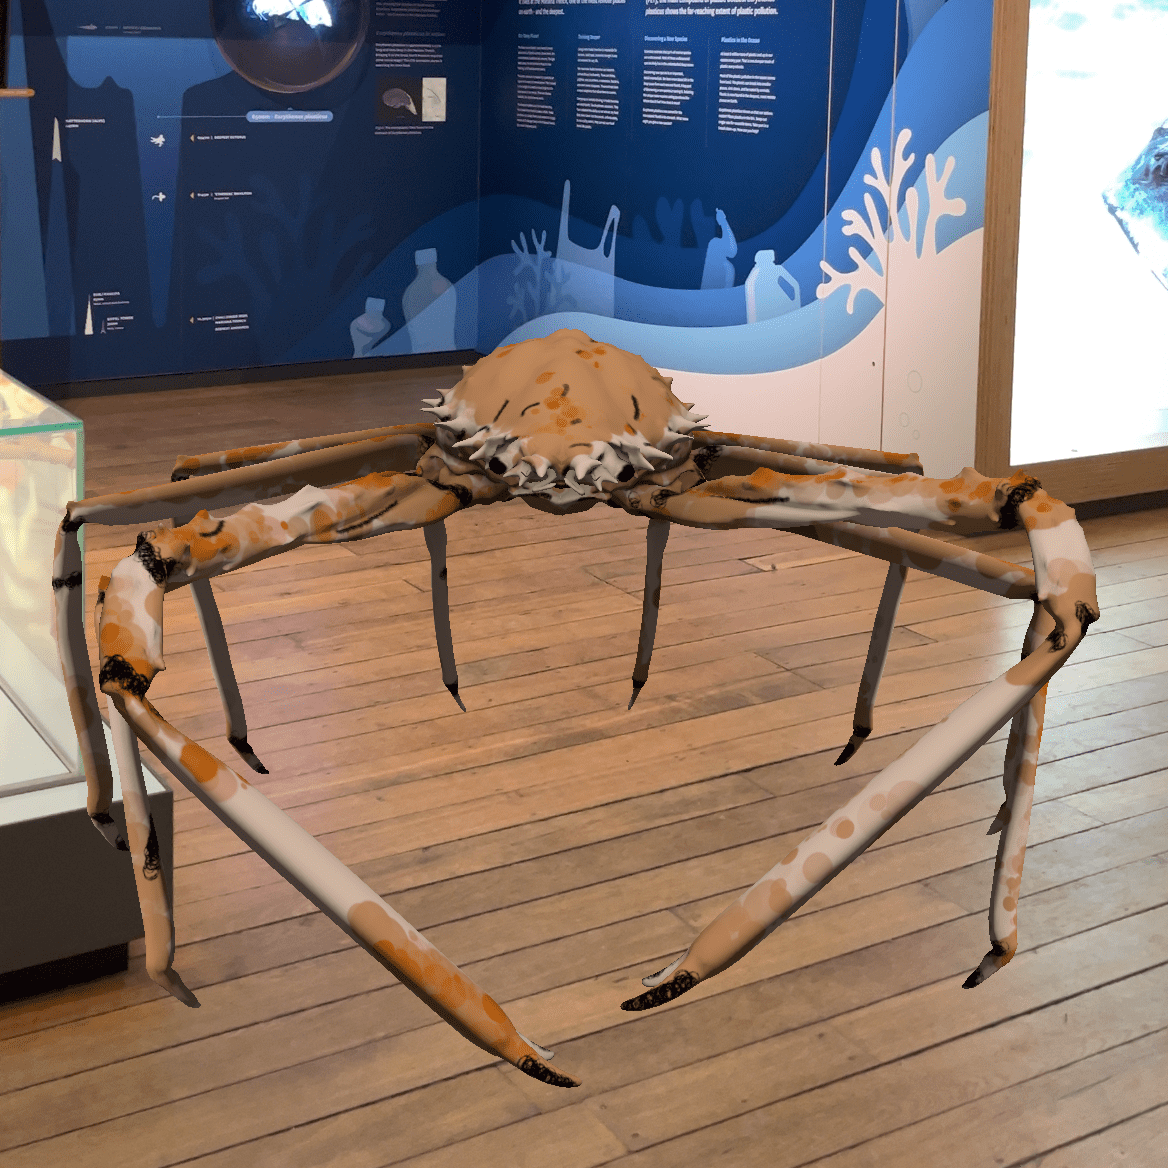 Depicts an Augmented Reality Spider Crab from the Mythquest app.